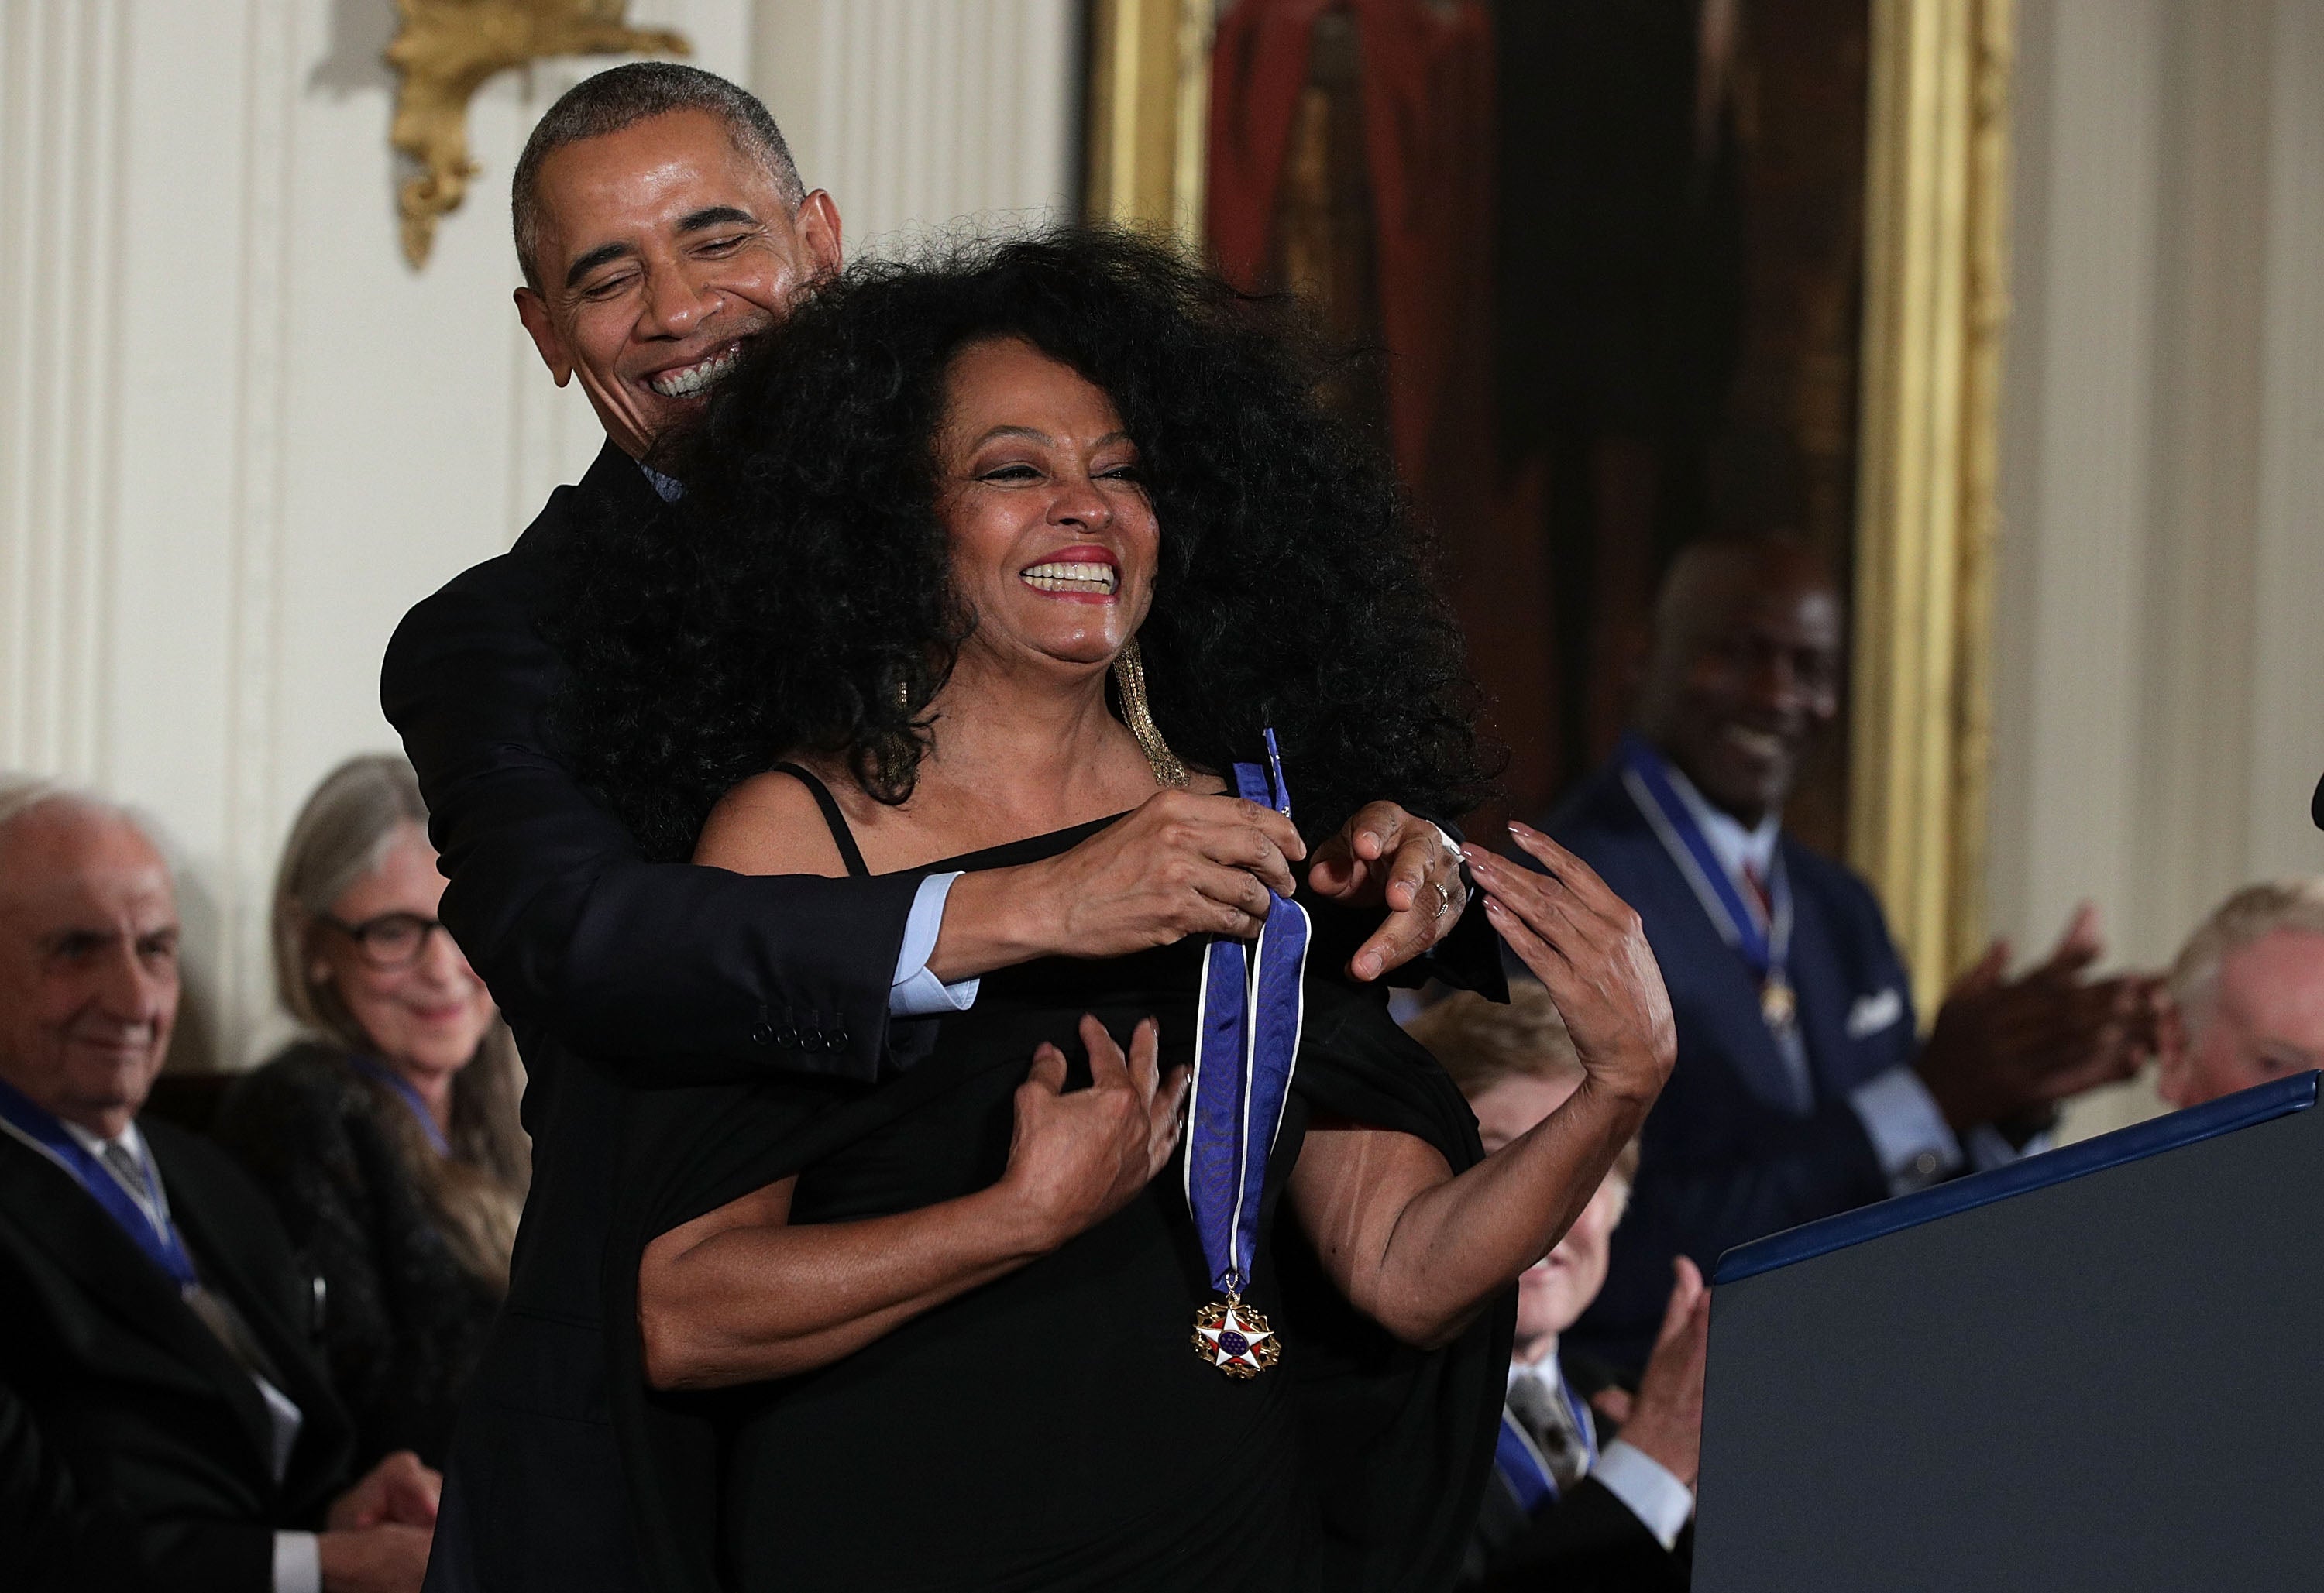 President Obama Was Completely In Awe Of Diana Ross And Cicely Tyson During Medal Of Freedom Ceremony
